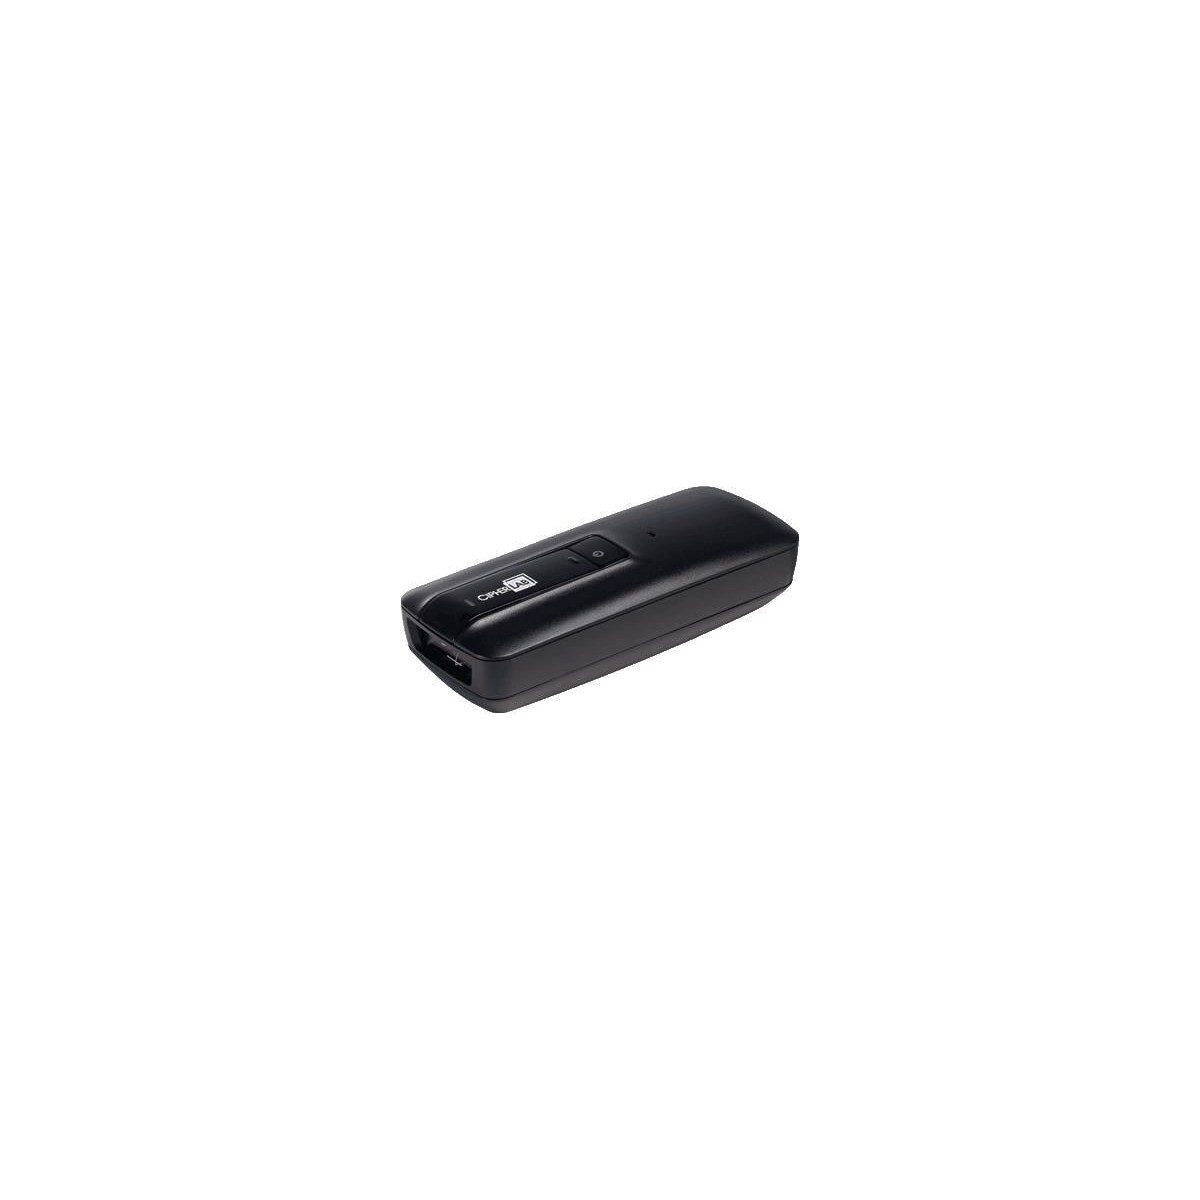 CIPHERLAB 2D Bluetooth Scanner Black incl. Micro USB Cable - Scanner